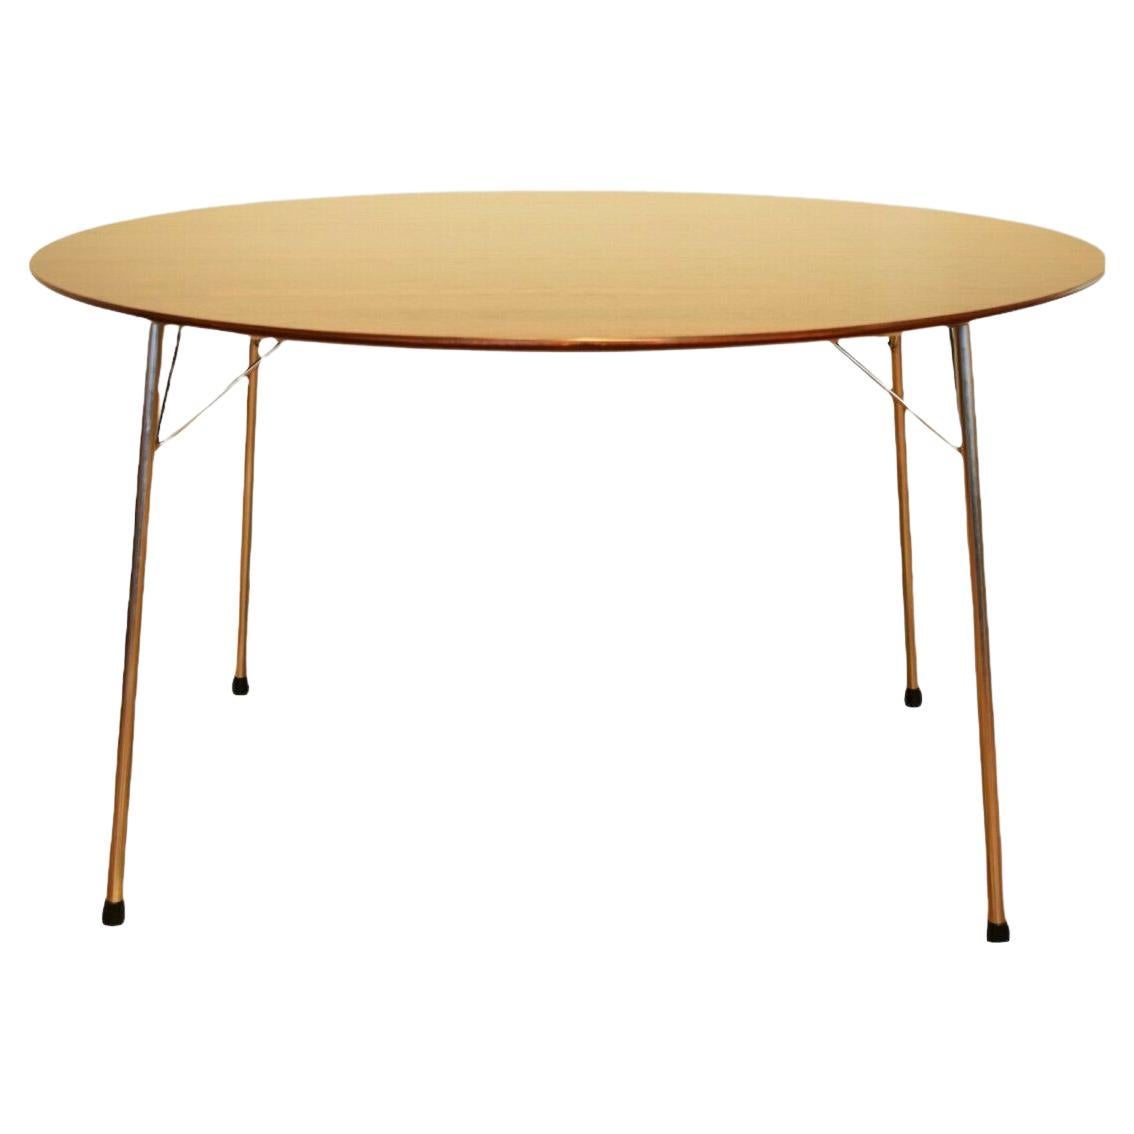 Arne Jacobson Model 3600 Rosewood Round Dining Table for Fritz Hansen, 1960's